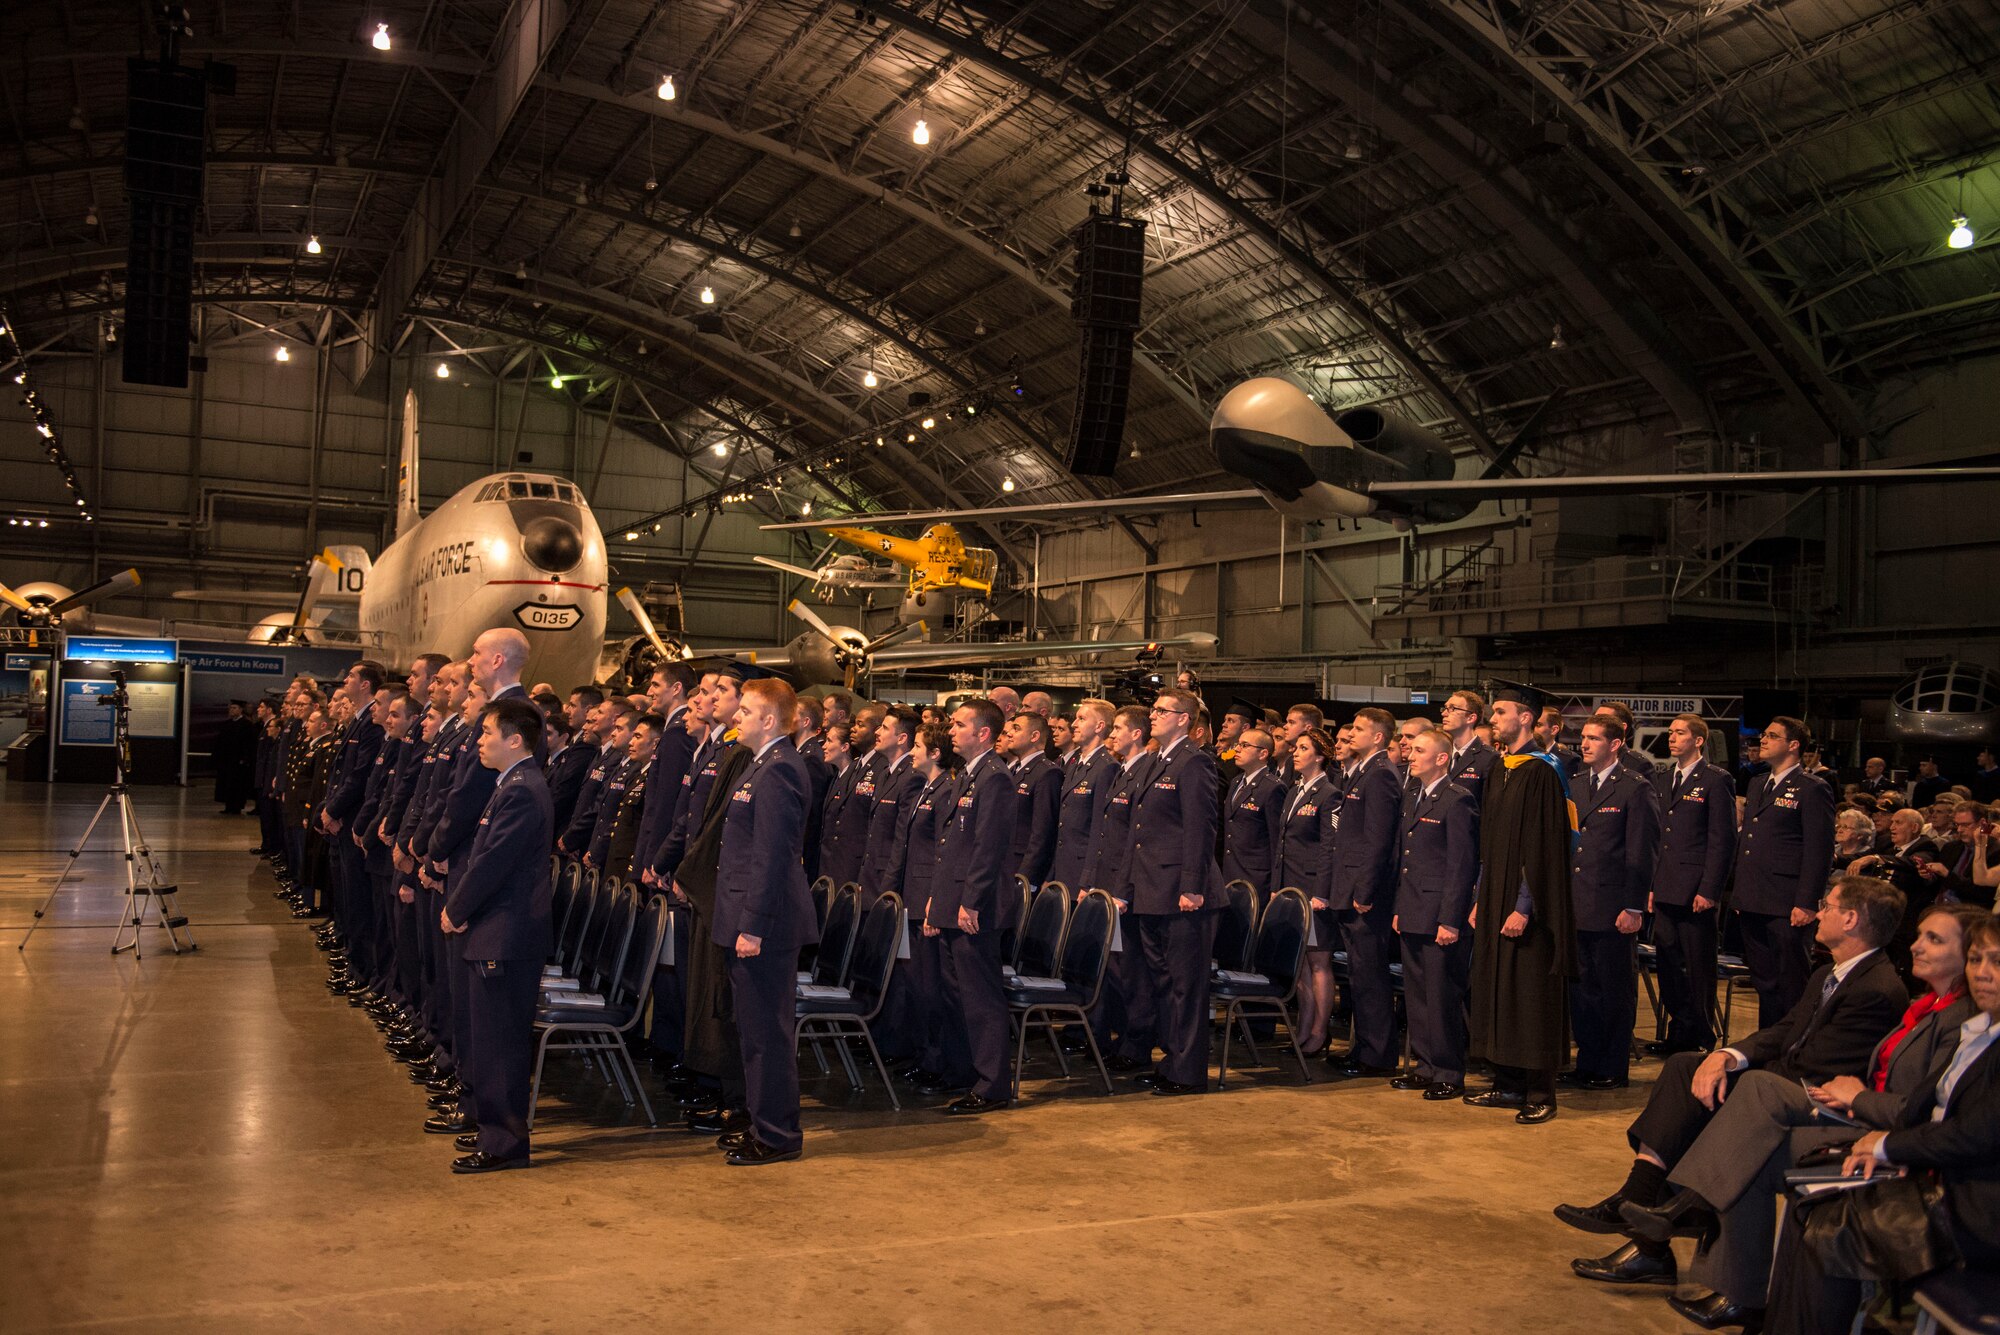 Graduates stand in formation during the Air Force Institute of Technology Commencement Ceremony March 24, 2016 at the National Museum of United States Air Force. AFIT is focused on providing exceptional defense-focused research-based graduate education. (U.S. Air Force photo by Michelle Gigante)